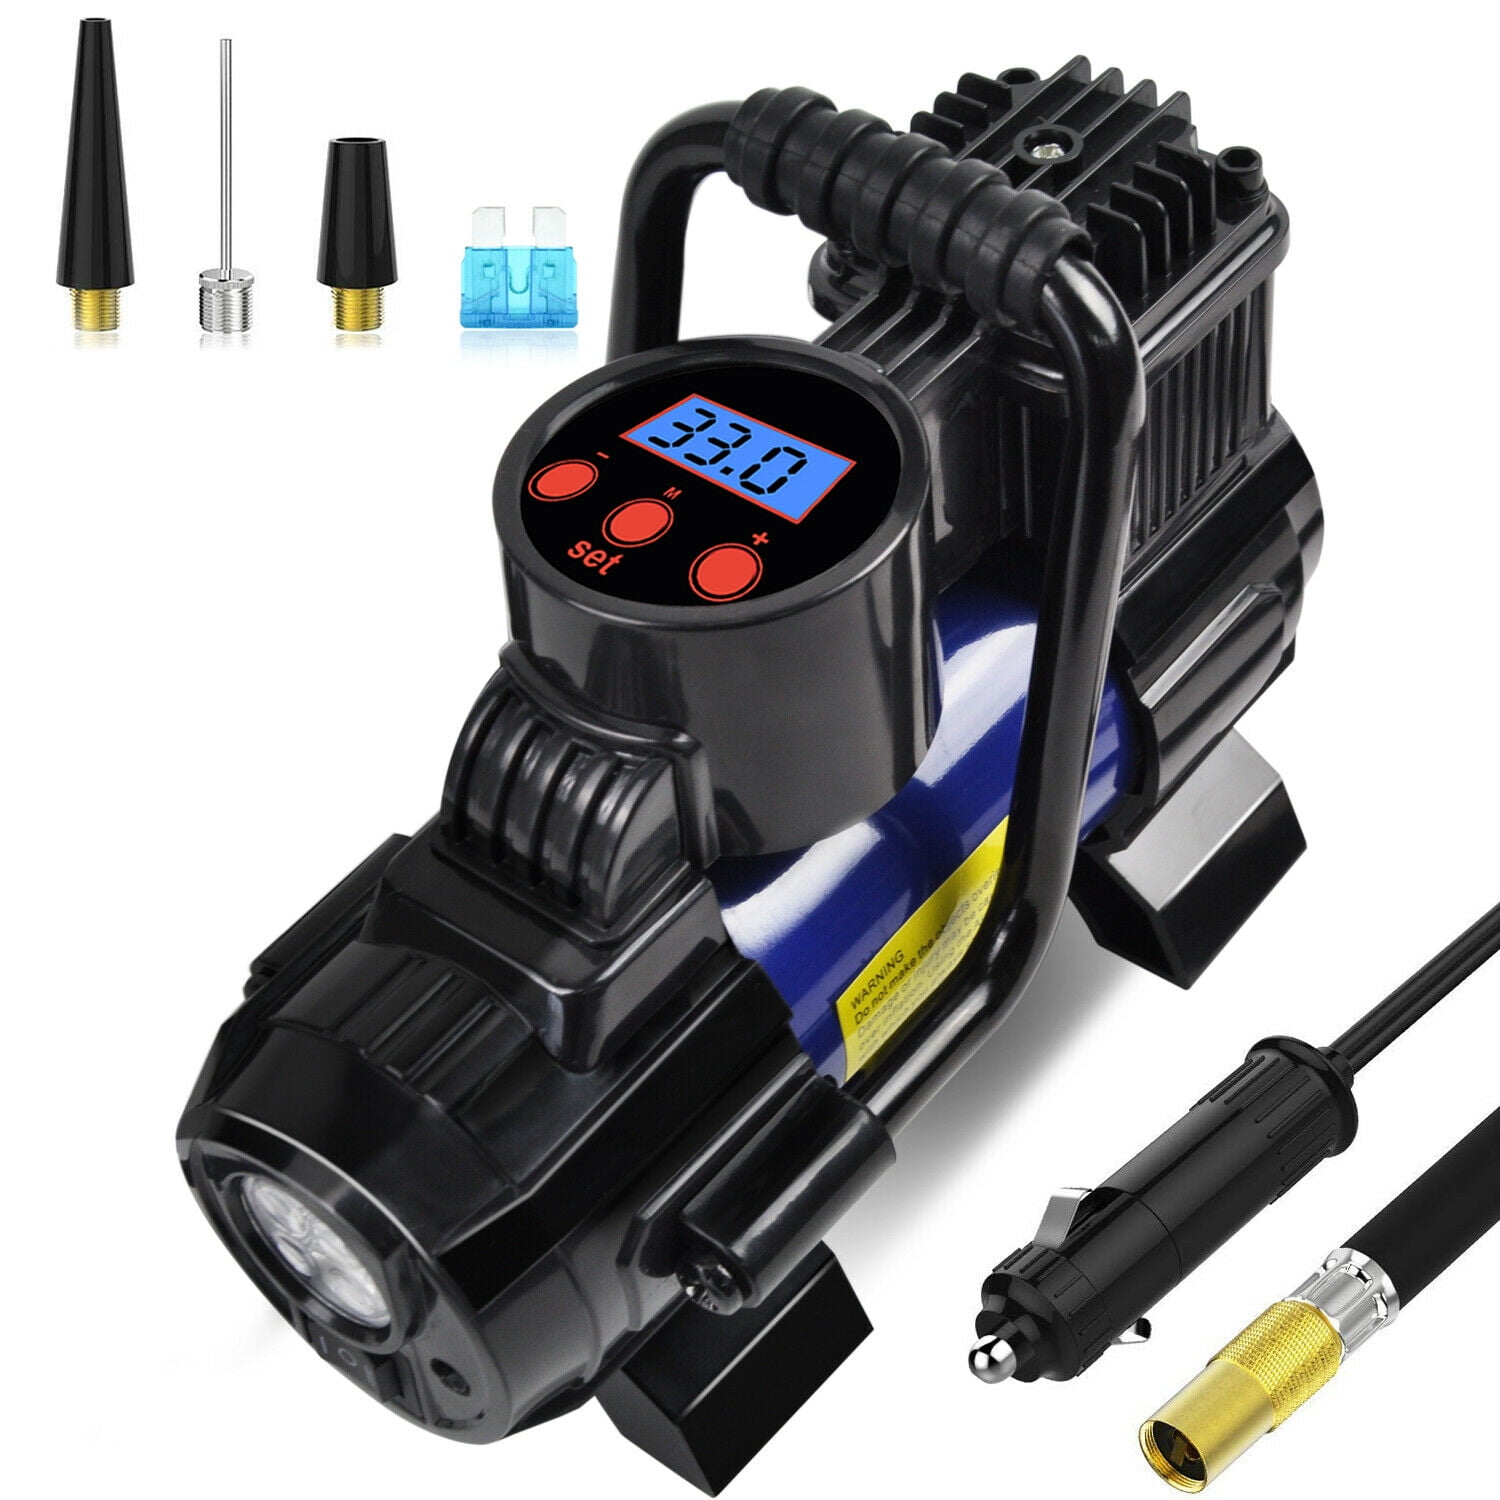 Details about   Heavy Duty Electric Tire Inflator Air Compressor Auto Shut Off Pump 12V 150 PSI 